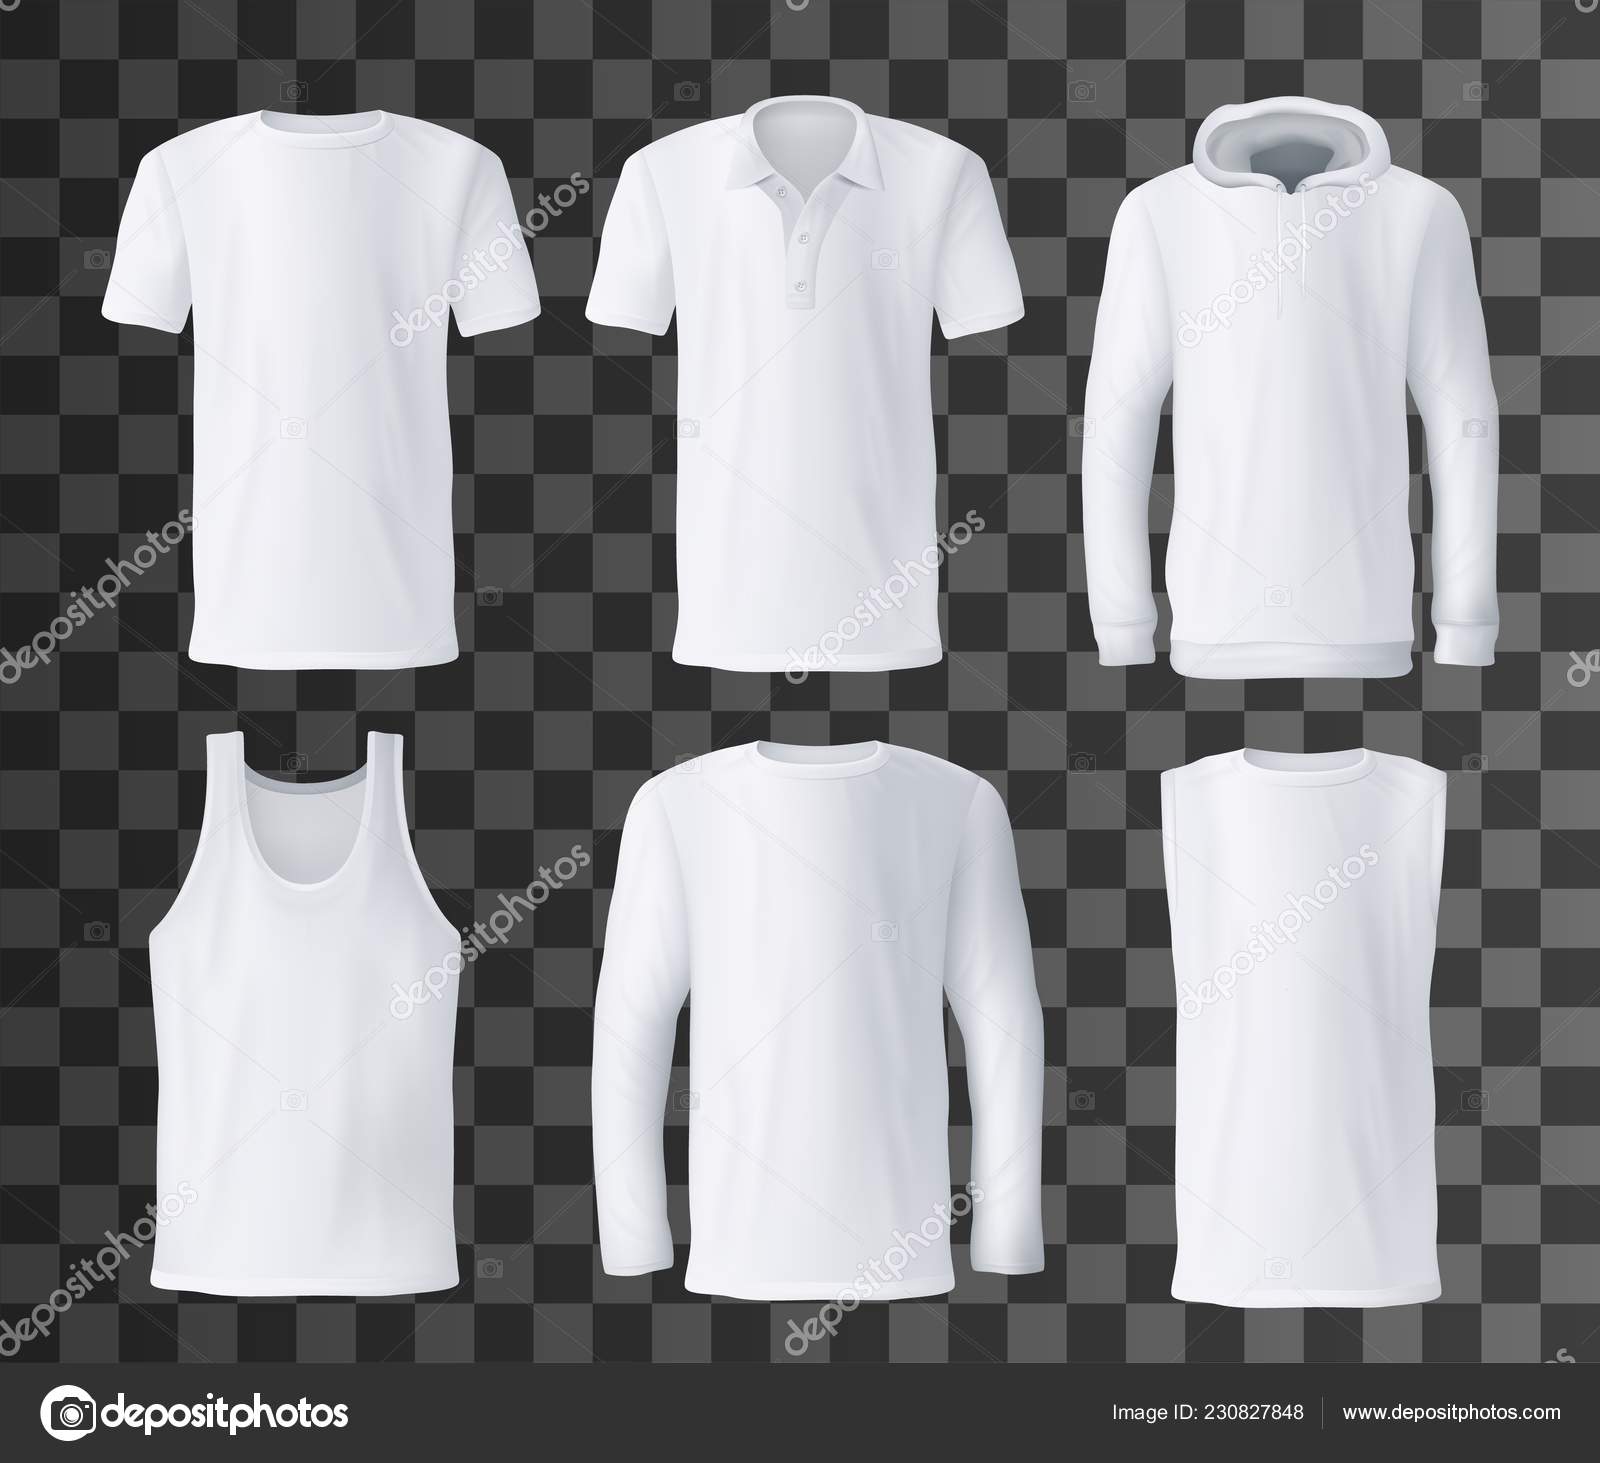 Download T Shirt Template Polo Hoodie And Tank Top Mockup Stock Vector C Seamartini 230827848 Yellowimages Mockups